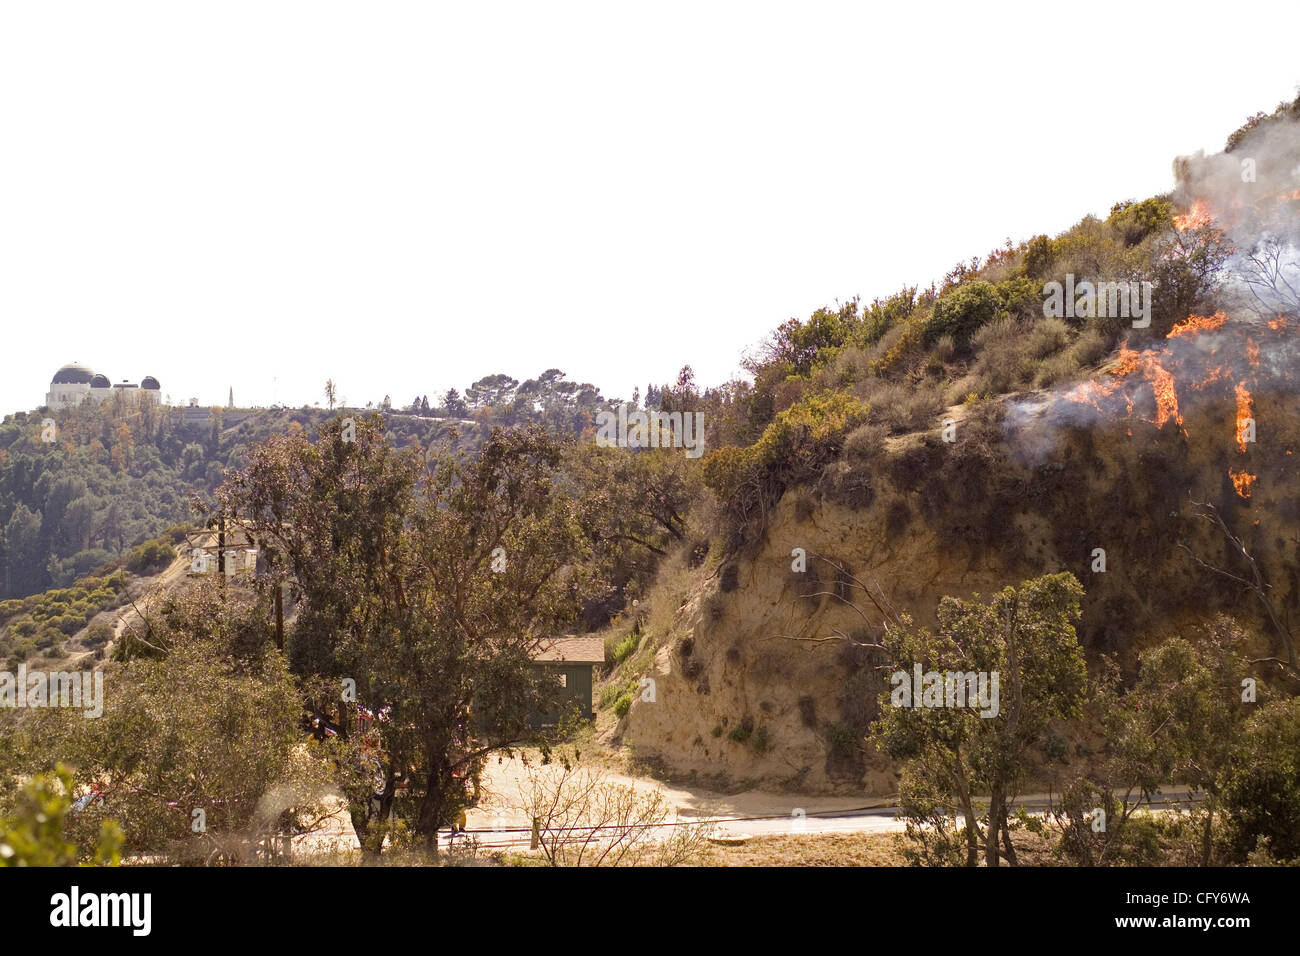 The Griffith Observatory is threatened by a brush fire burning out of control in Griffith Park, Los Angeles. Authorities said the fire has scorched 600 acres of trees and brush in Los Angeles' sprawling Griffith Park Tuesday. No homes were immediately threatened, but evacuations were put into effect Stock Photo